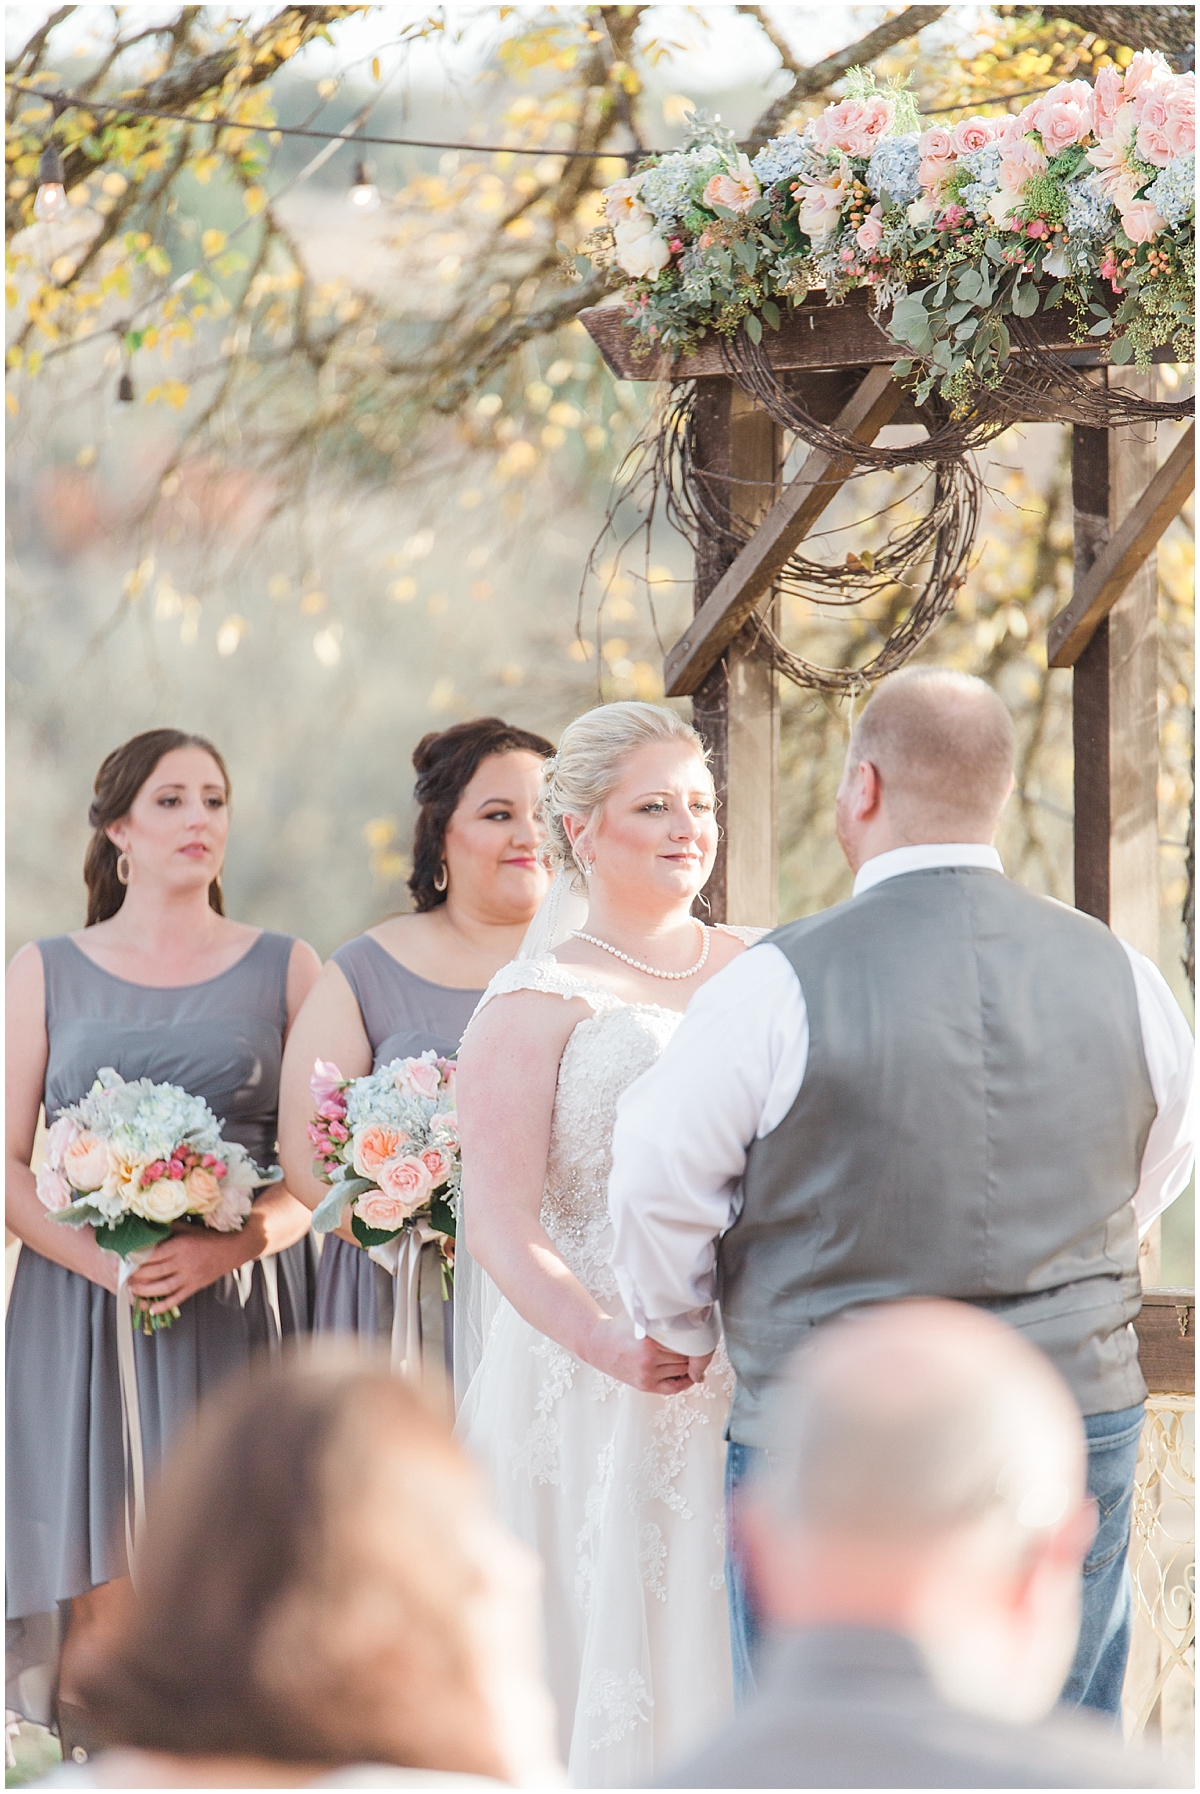 a-slate-blue-and-grey-winter-wedding-at-cw-hill-country-ranch-in-boerne-texas-by-allison-jeffers-wedding-photography_0069